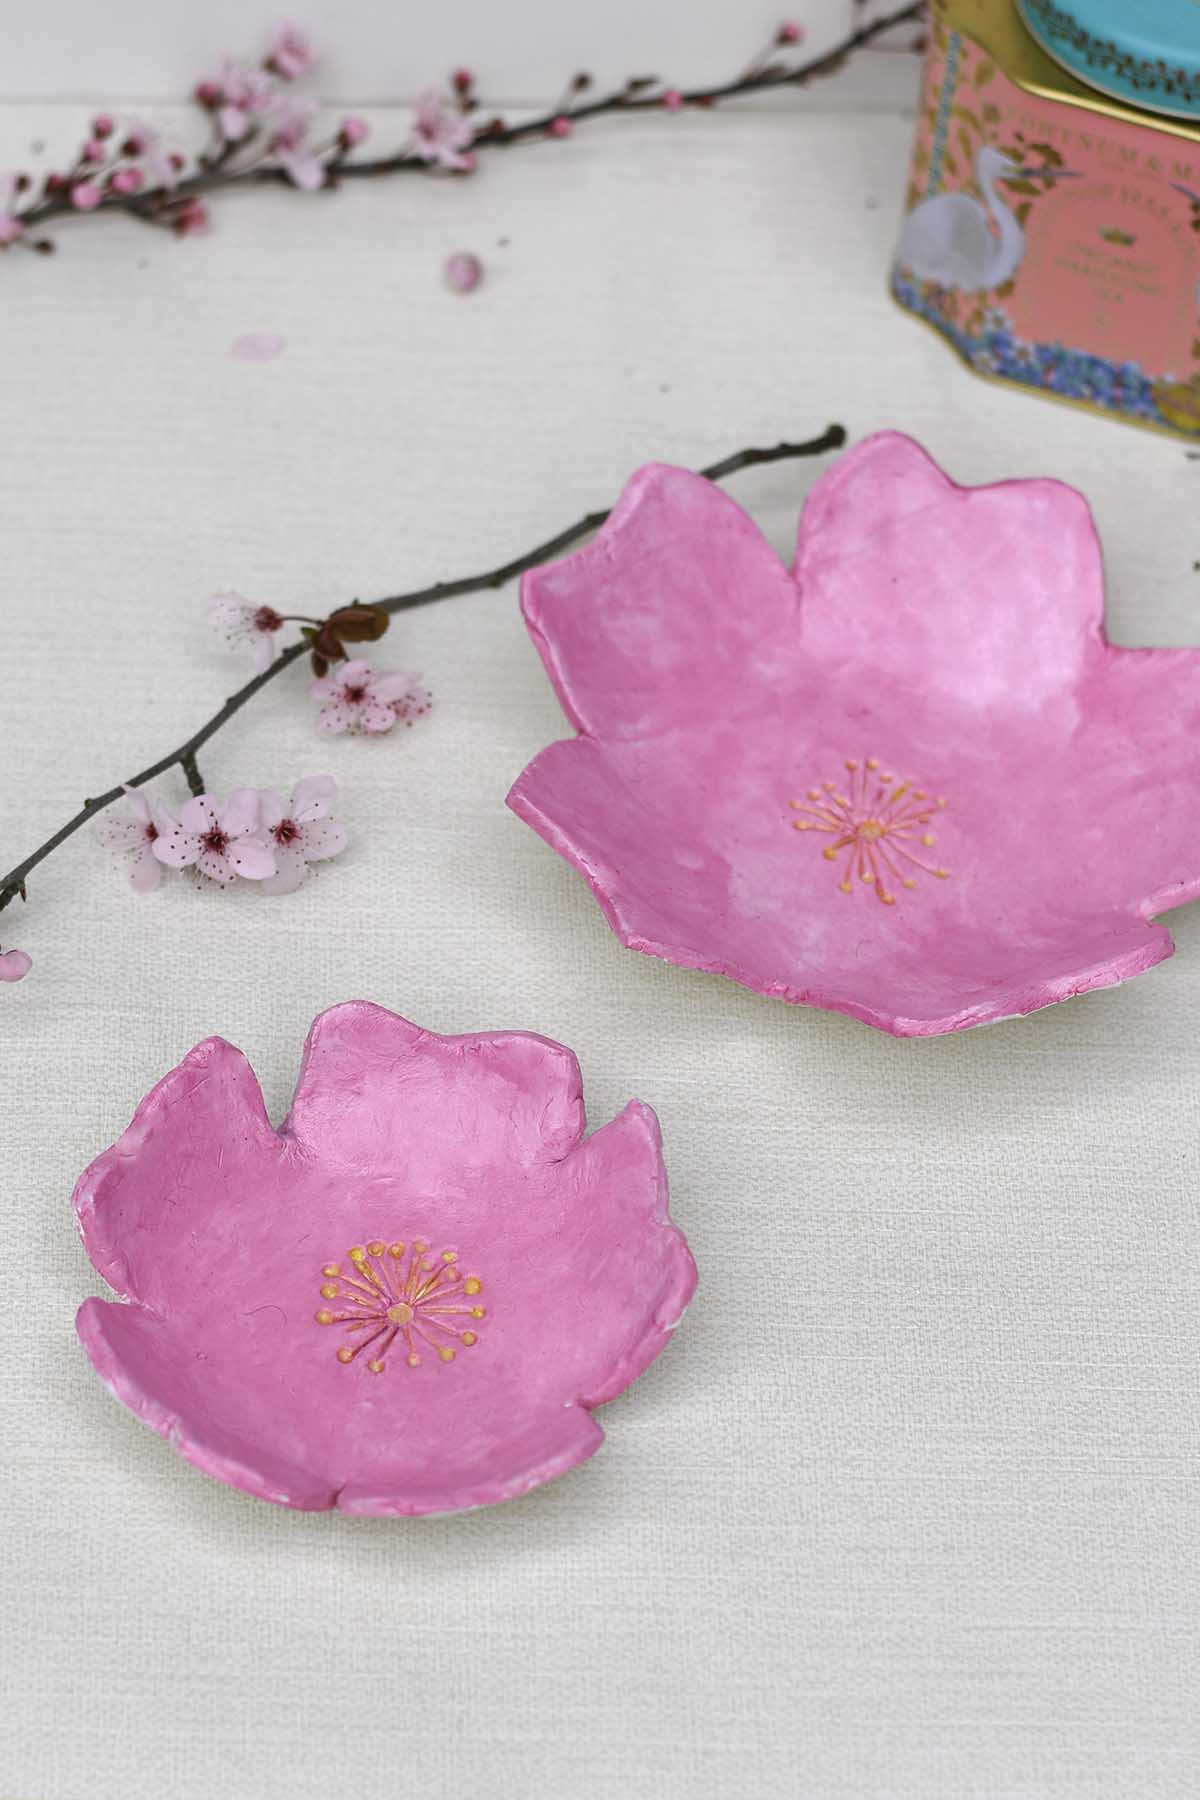 Cherry blossom clay ring / trinket bowls dishes in 2 sizes